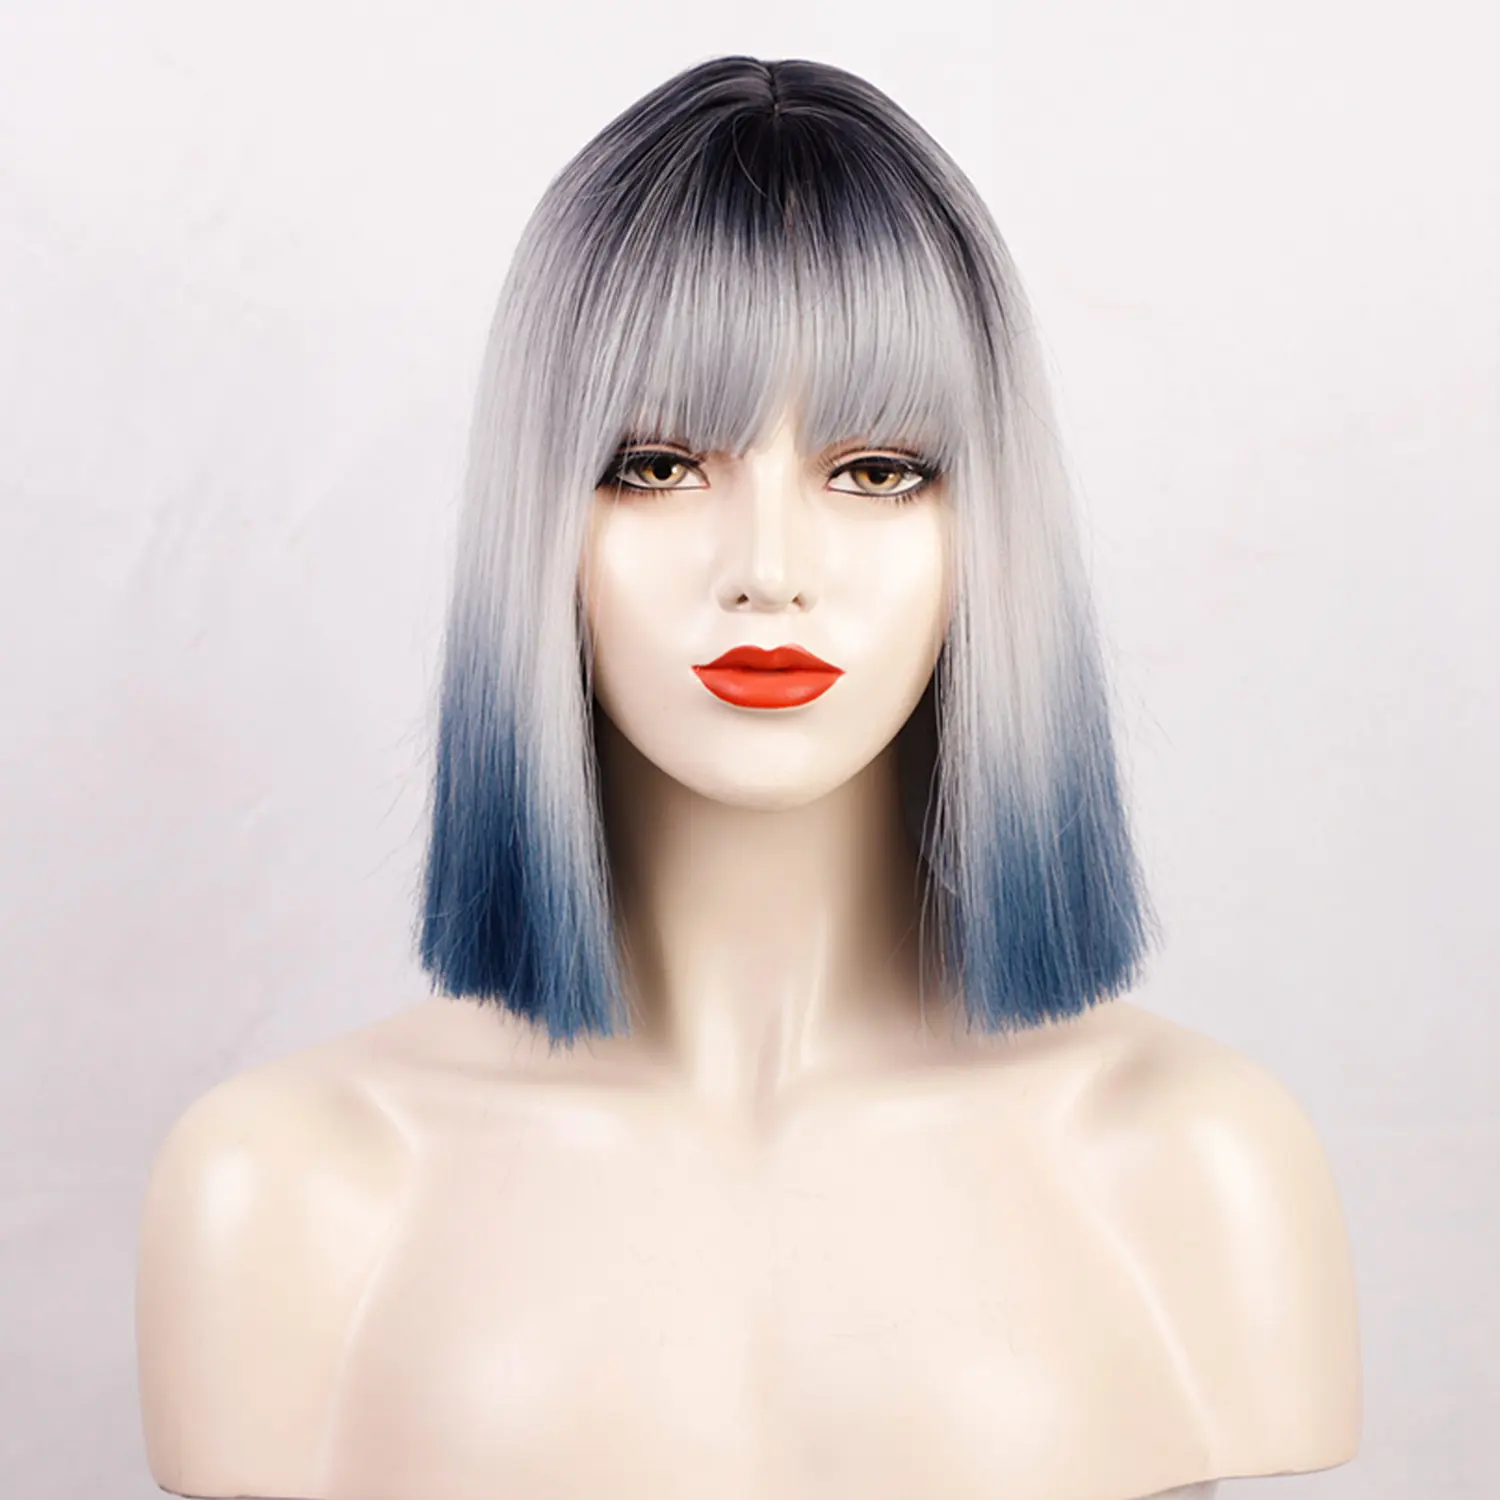 Short Root Black Ombre Silver to blue 3 Tones Bob Cut Wigs With Bangs Heat Resistant Synthetic Straight Hair Wigs for Women